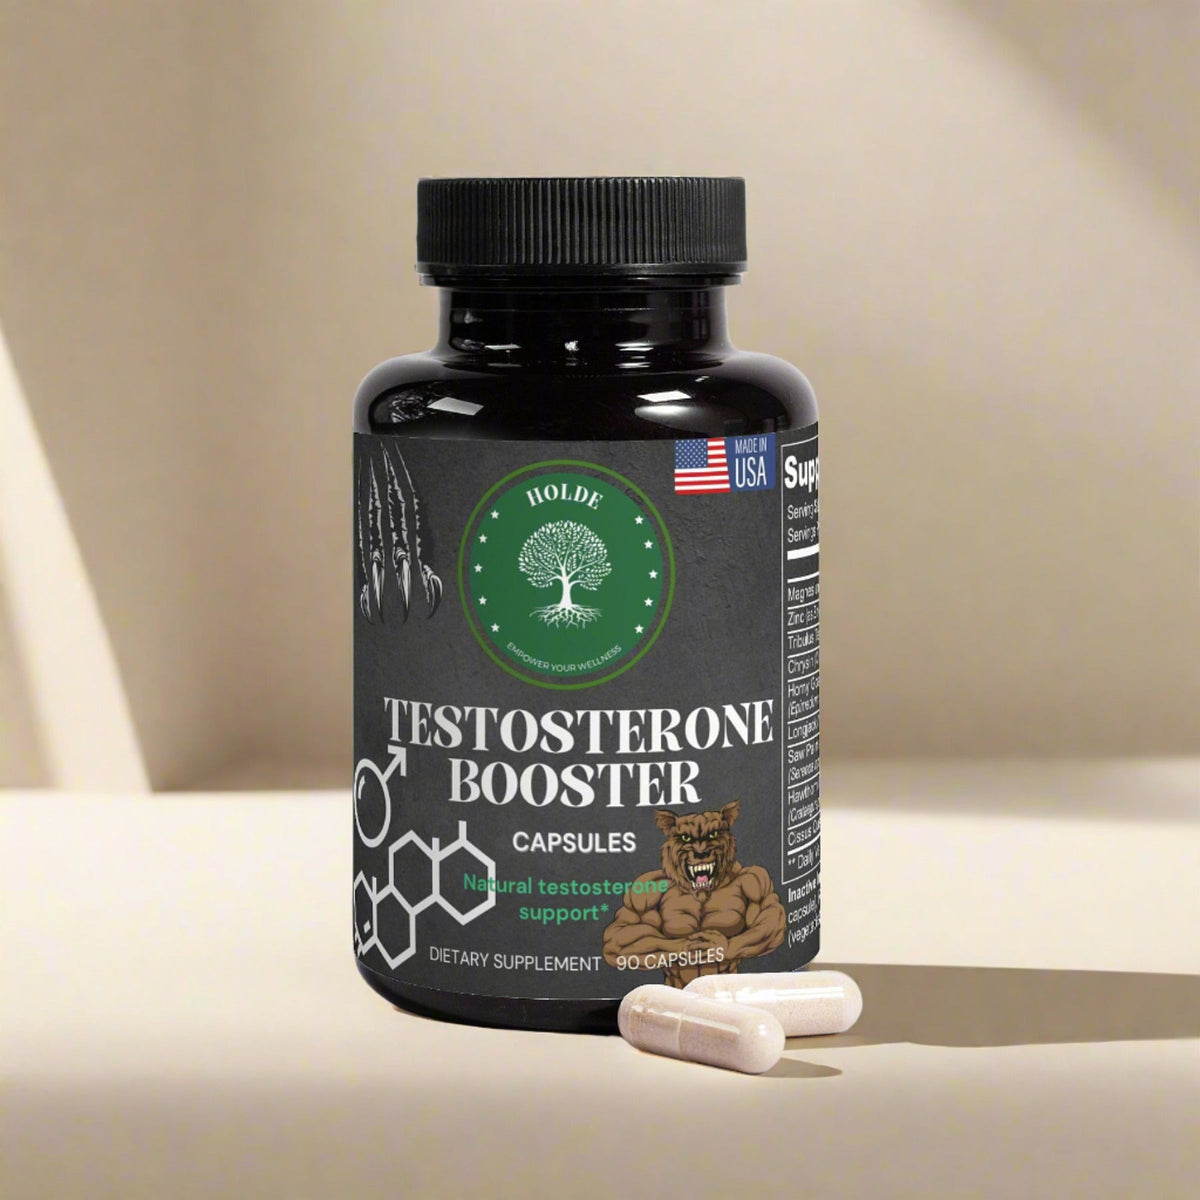 Testosterone Booster - HOLDE